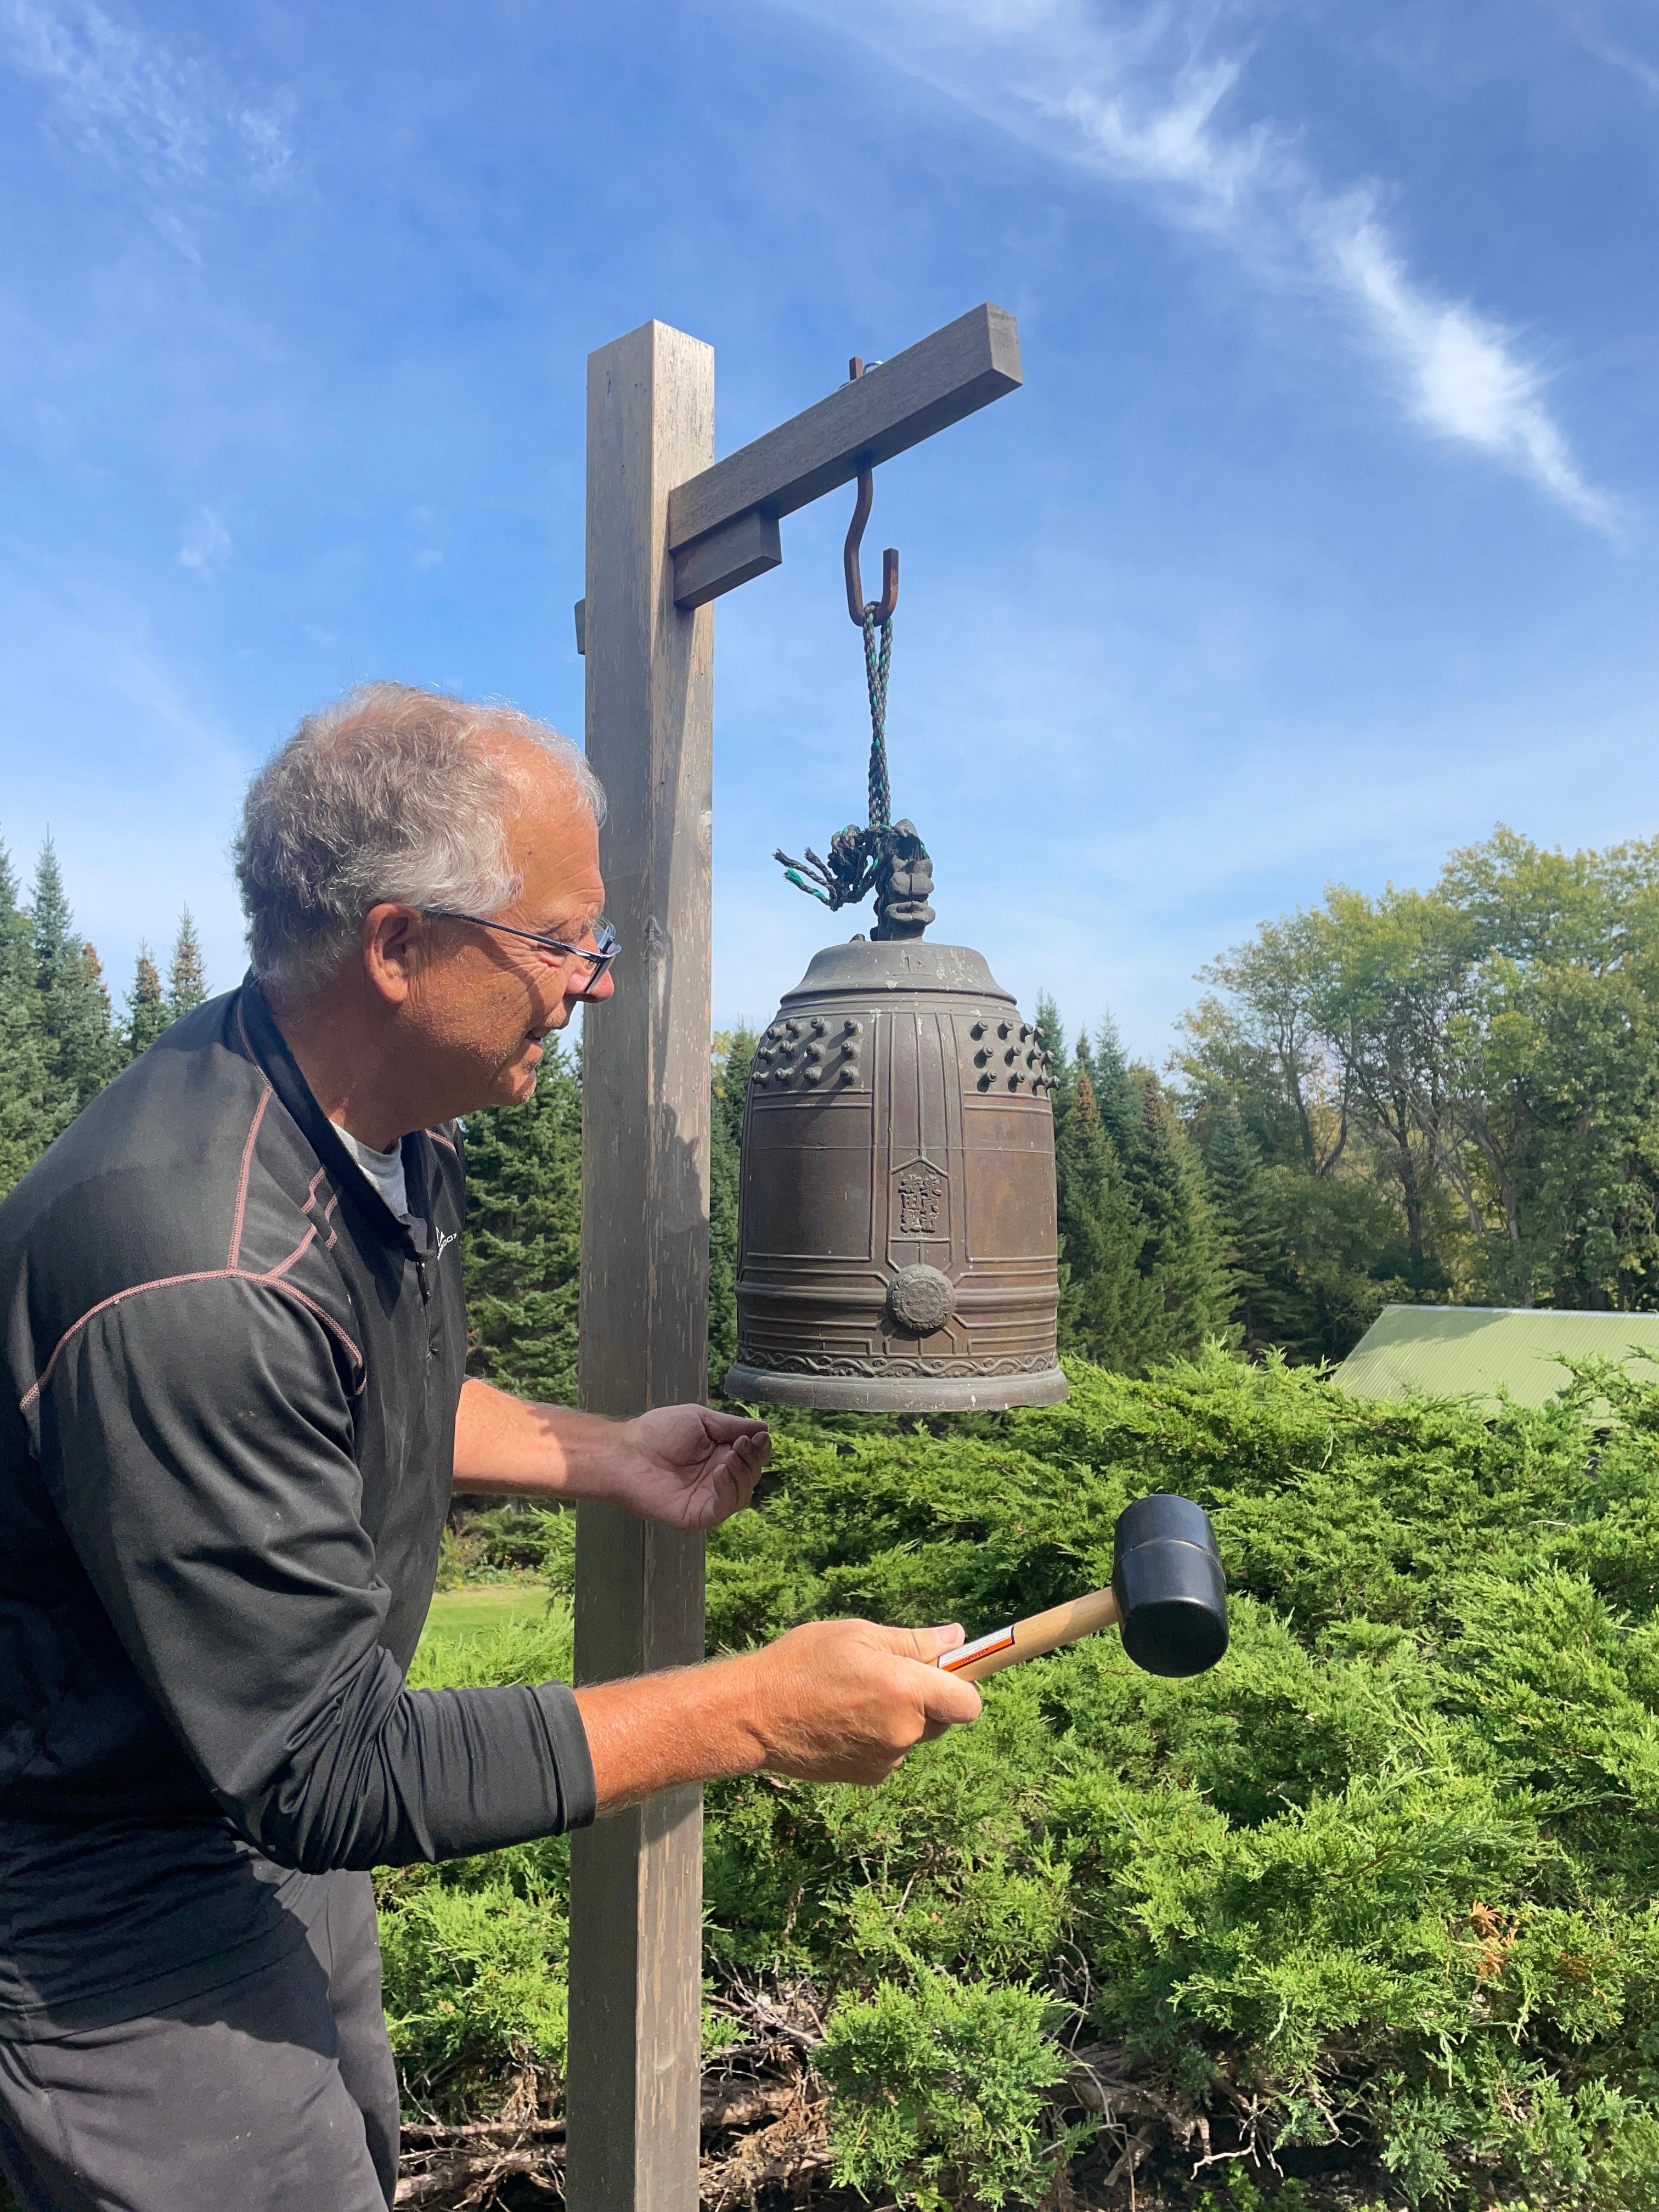 For your special garden setting or indoor display space.

Large Hand Cast Original Green Patina Bronze Bell With Makers Signature emblazoned on its side. Bold pleasing sound

Beautiful deep resonating ring tones await the new owner of this large